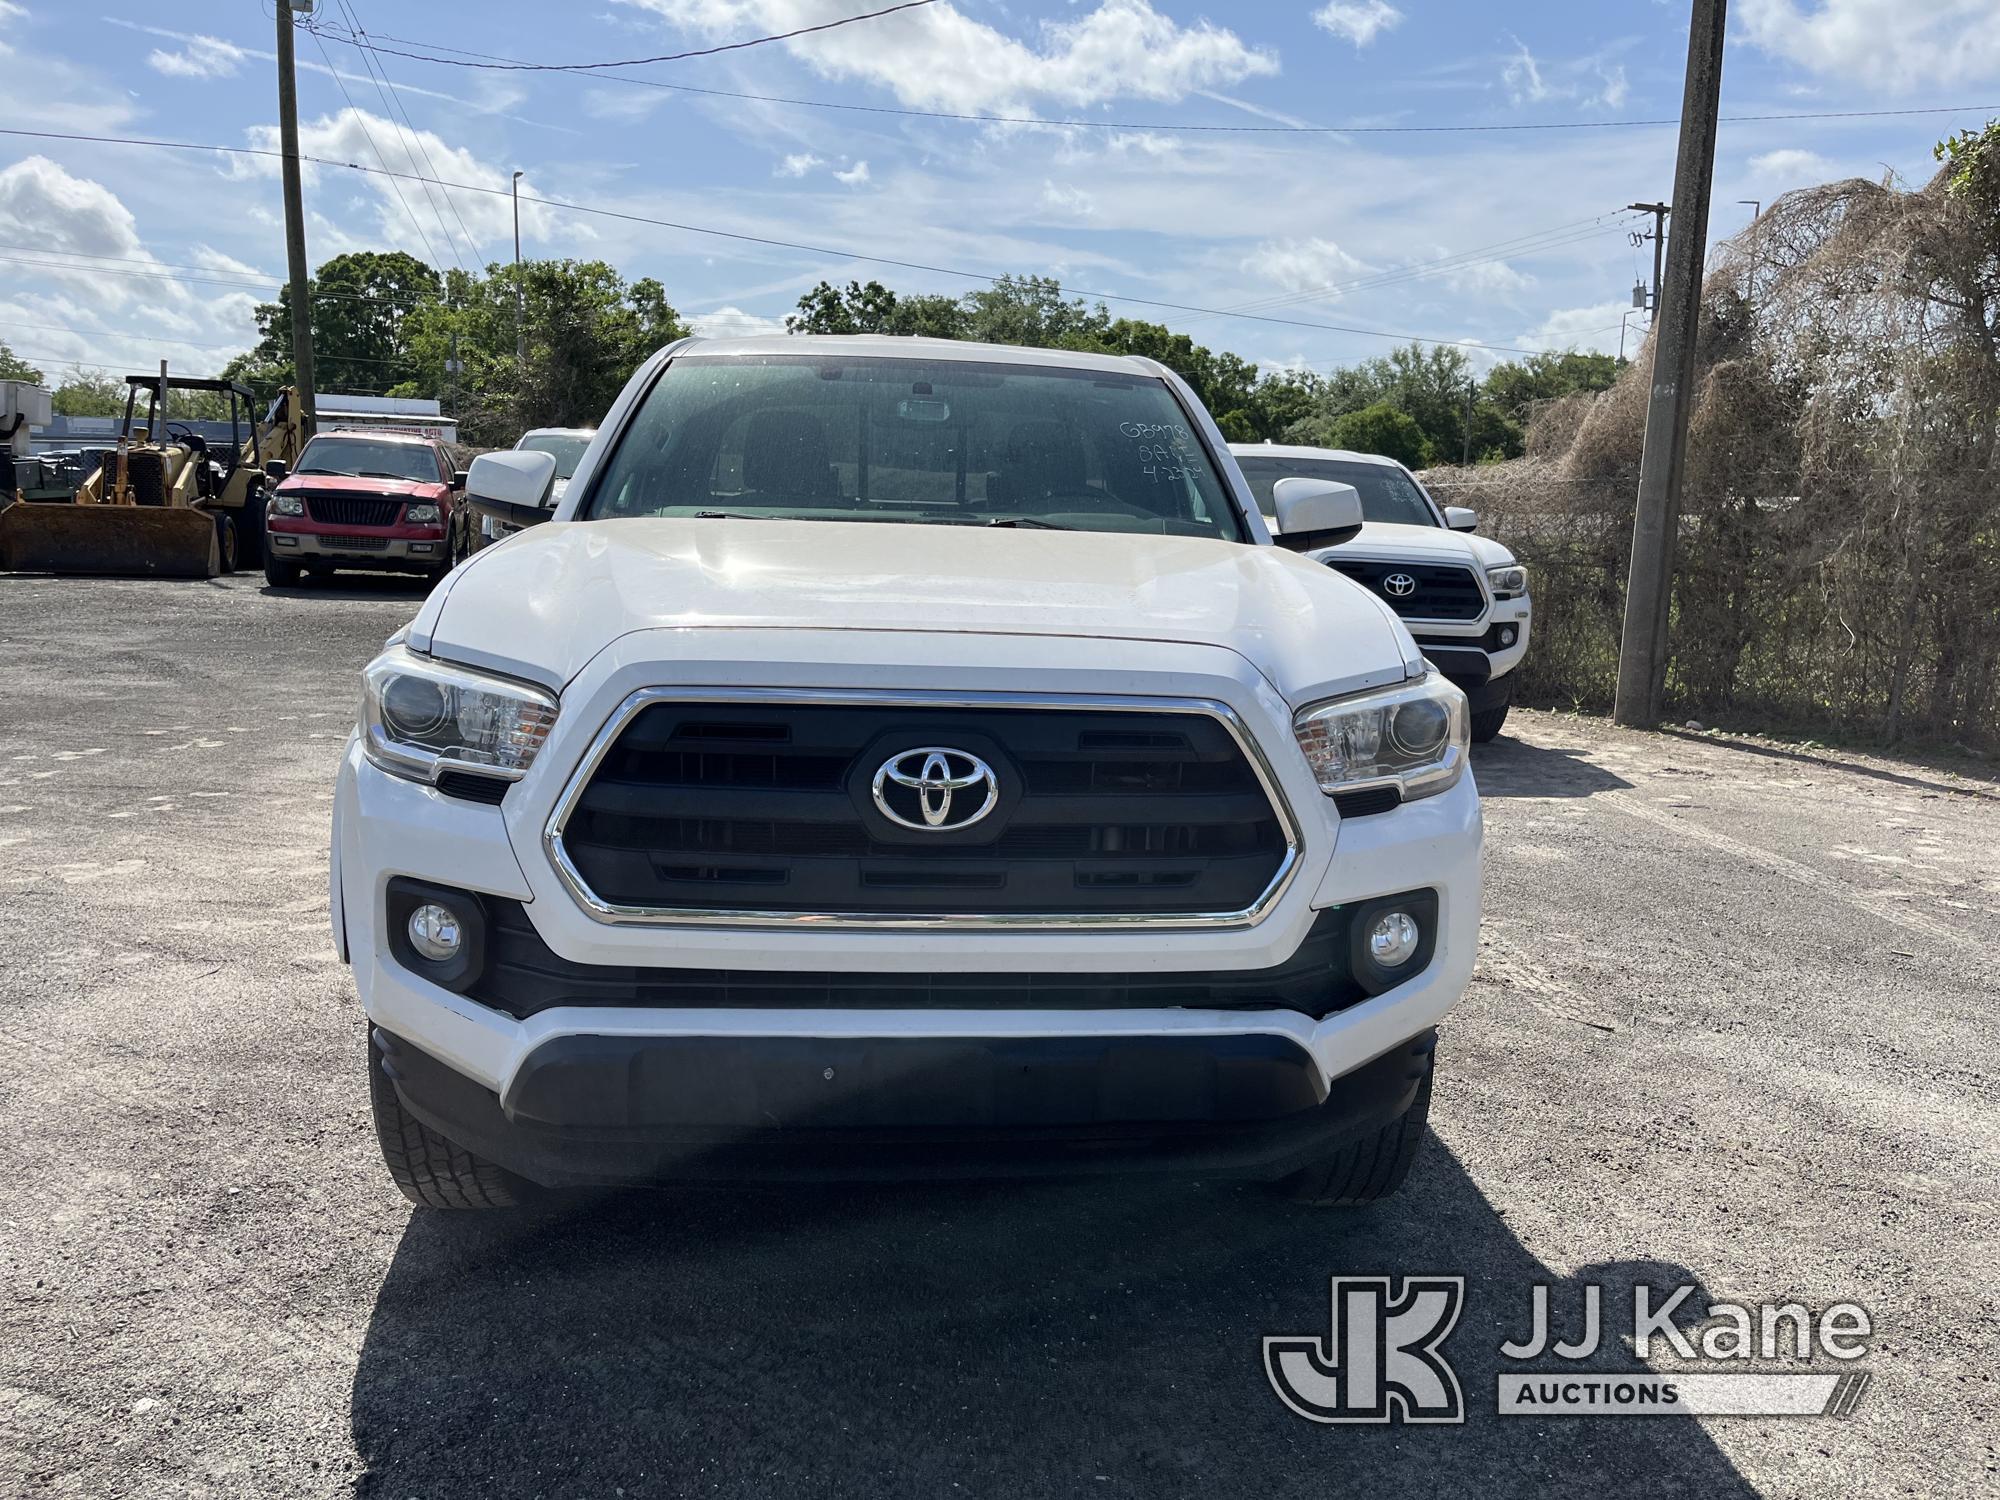 (Tampa, FL) 2017 Toyota Tacoma 4x4 Extended-Cab Pickup Truck Runs & Moves) (Body Damage